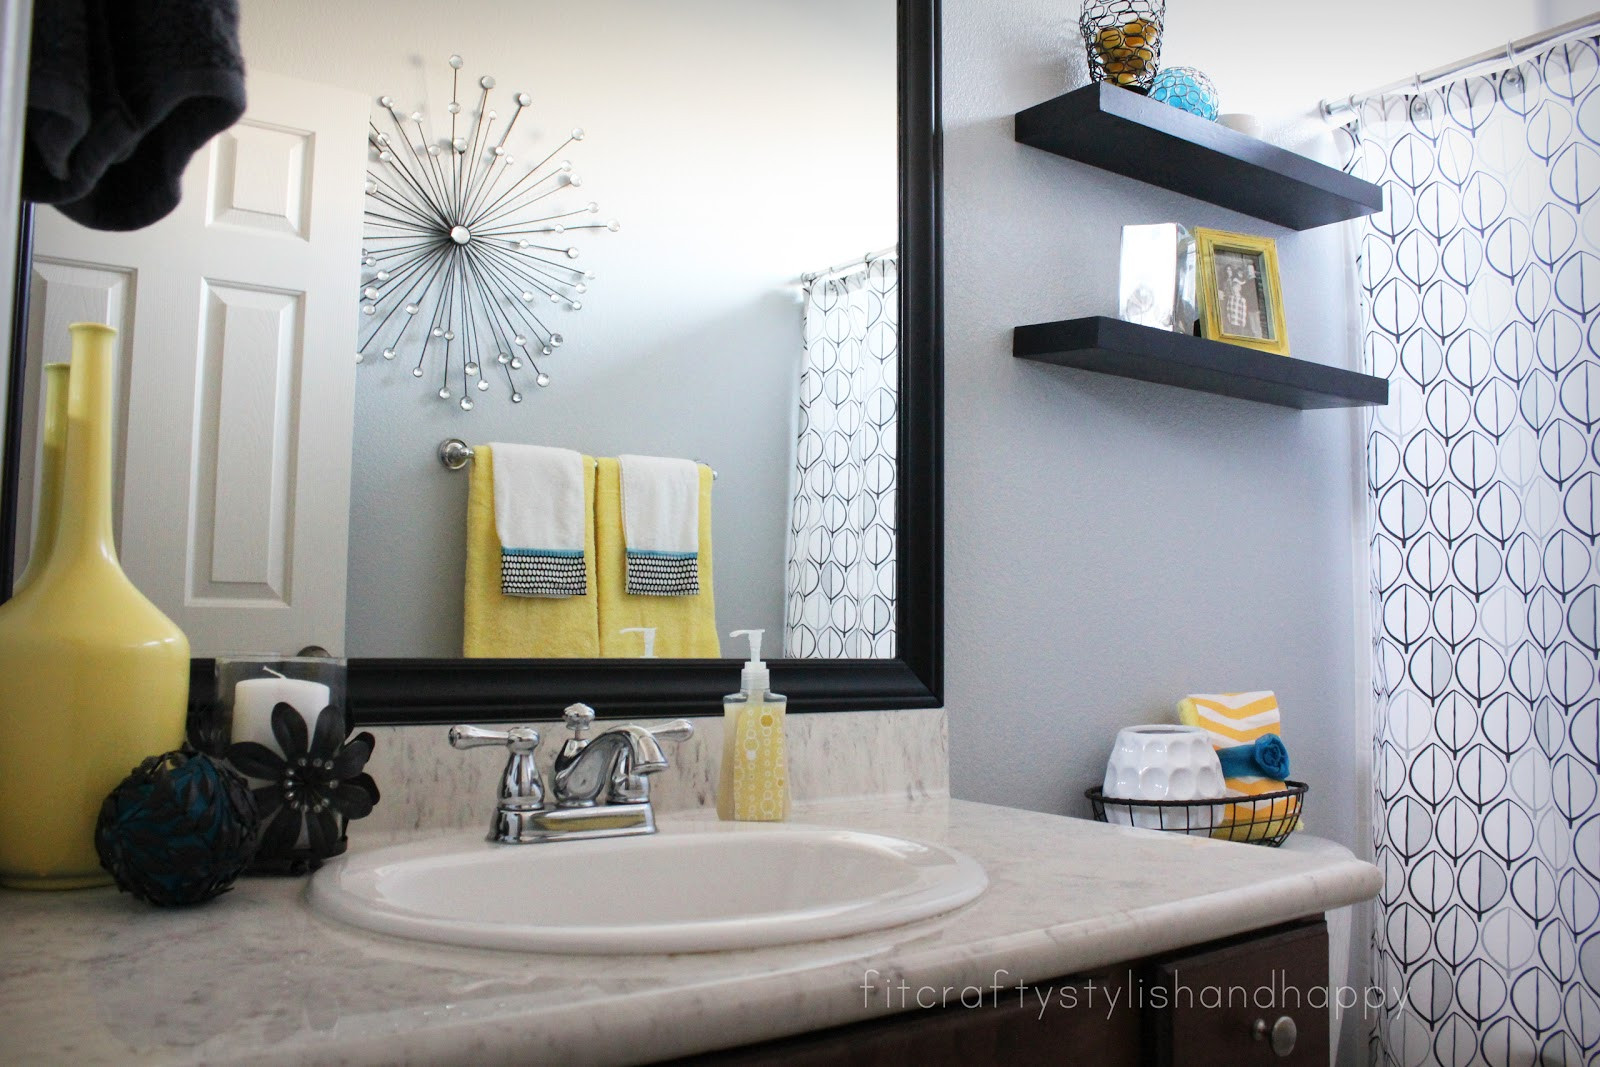 Black And White Bathroom Decor
 Fit Crafty Stylish and Happy Guest Bathroom Makeover